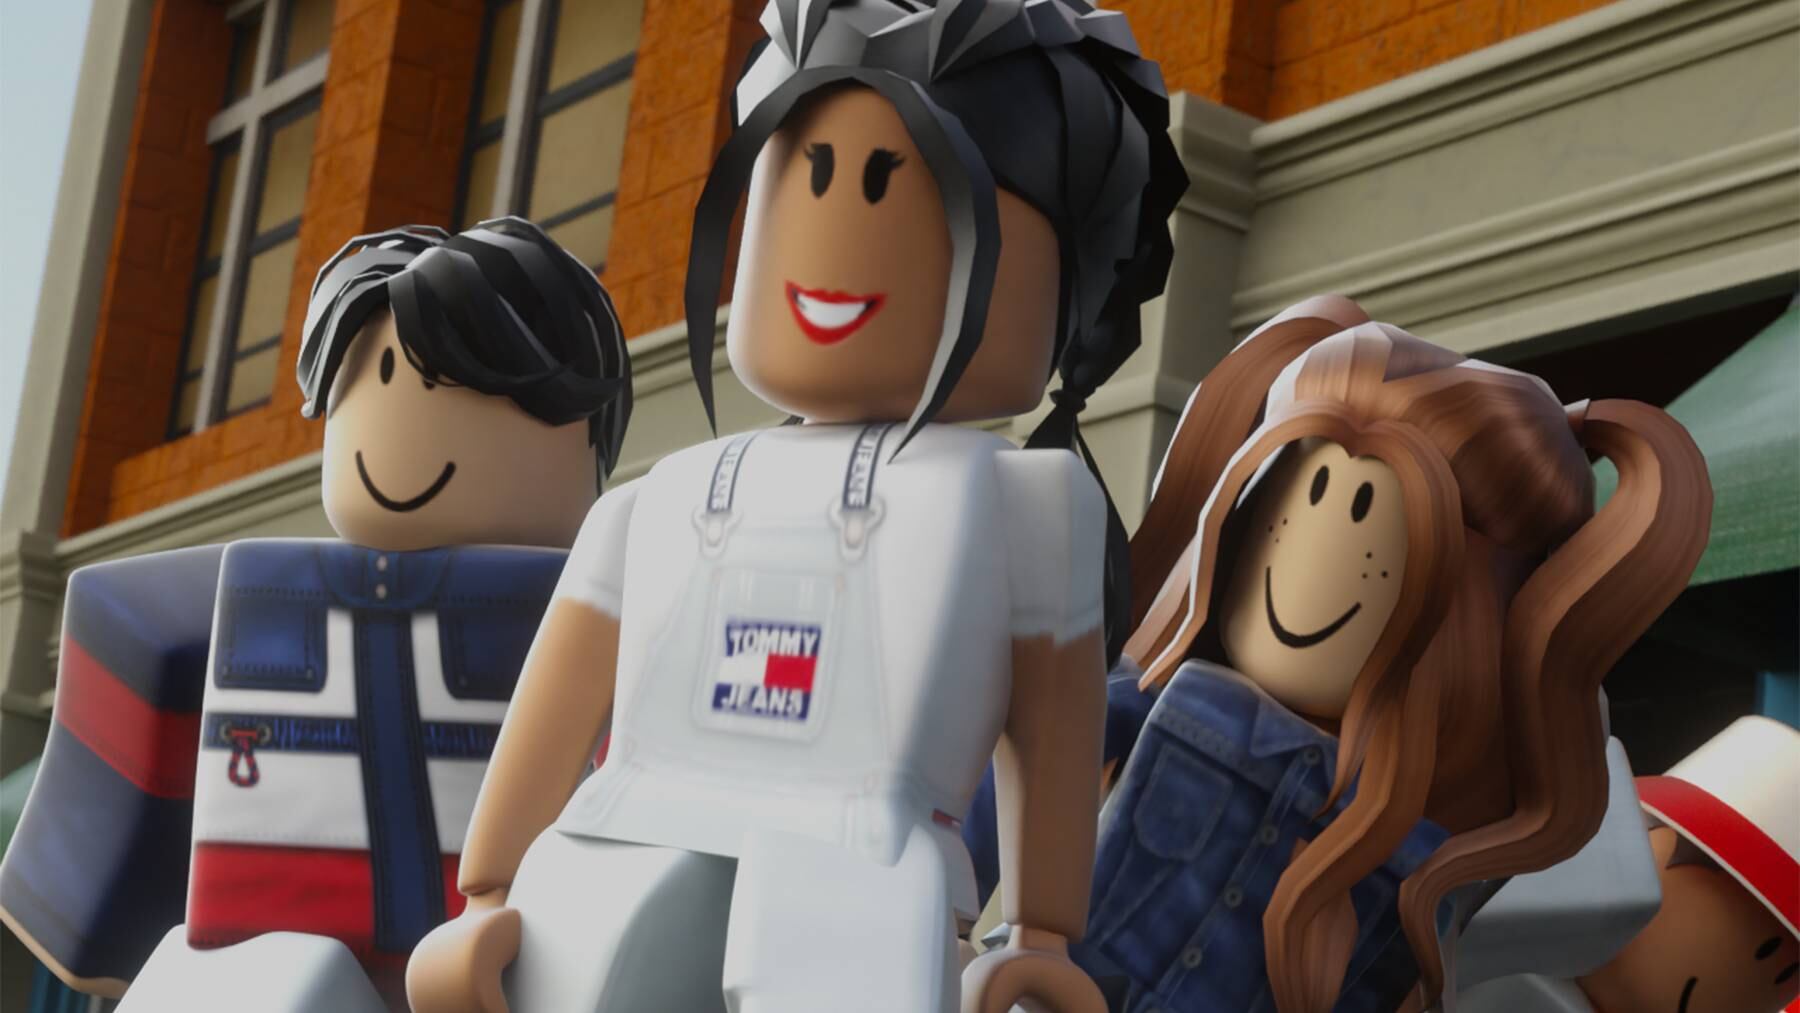 In December, Tommy Hilfiger collaborated with gaming platform Roblox for the Tommy X Roblox Creators collection, which features thirty digital fashion items that people can use to dress their avatars within Roblox.